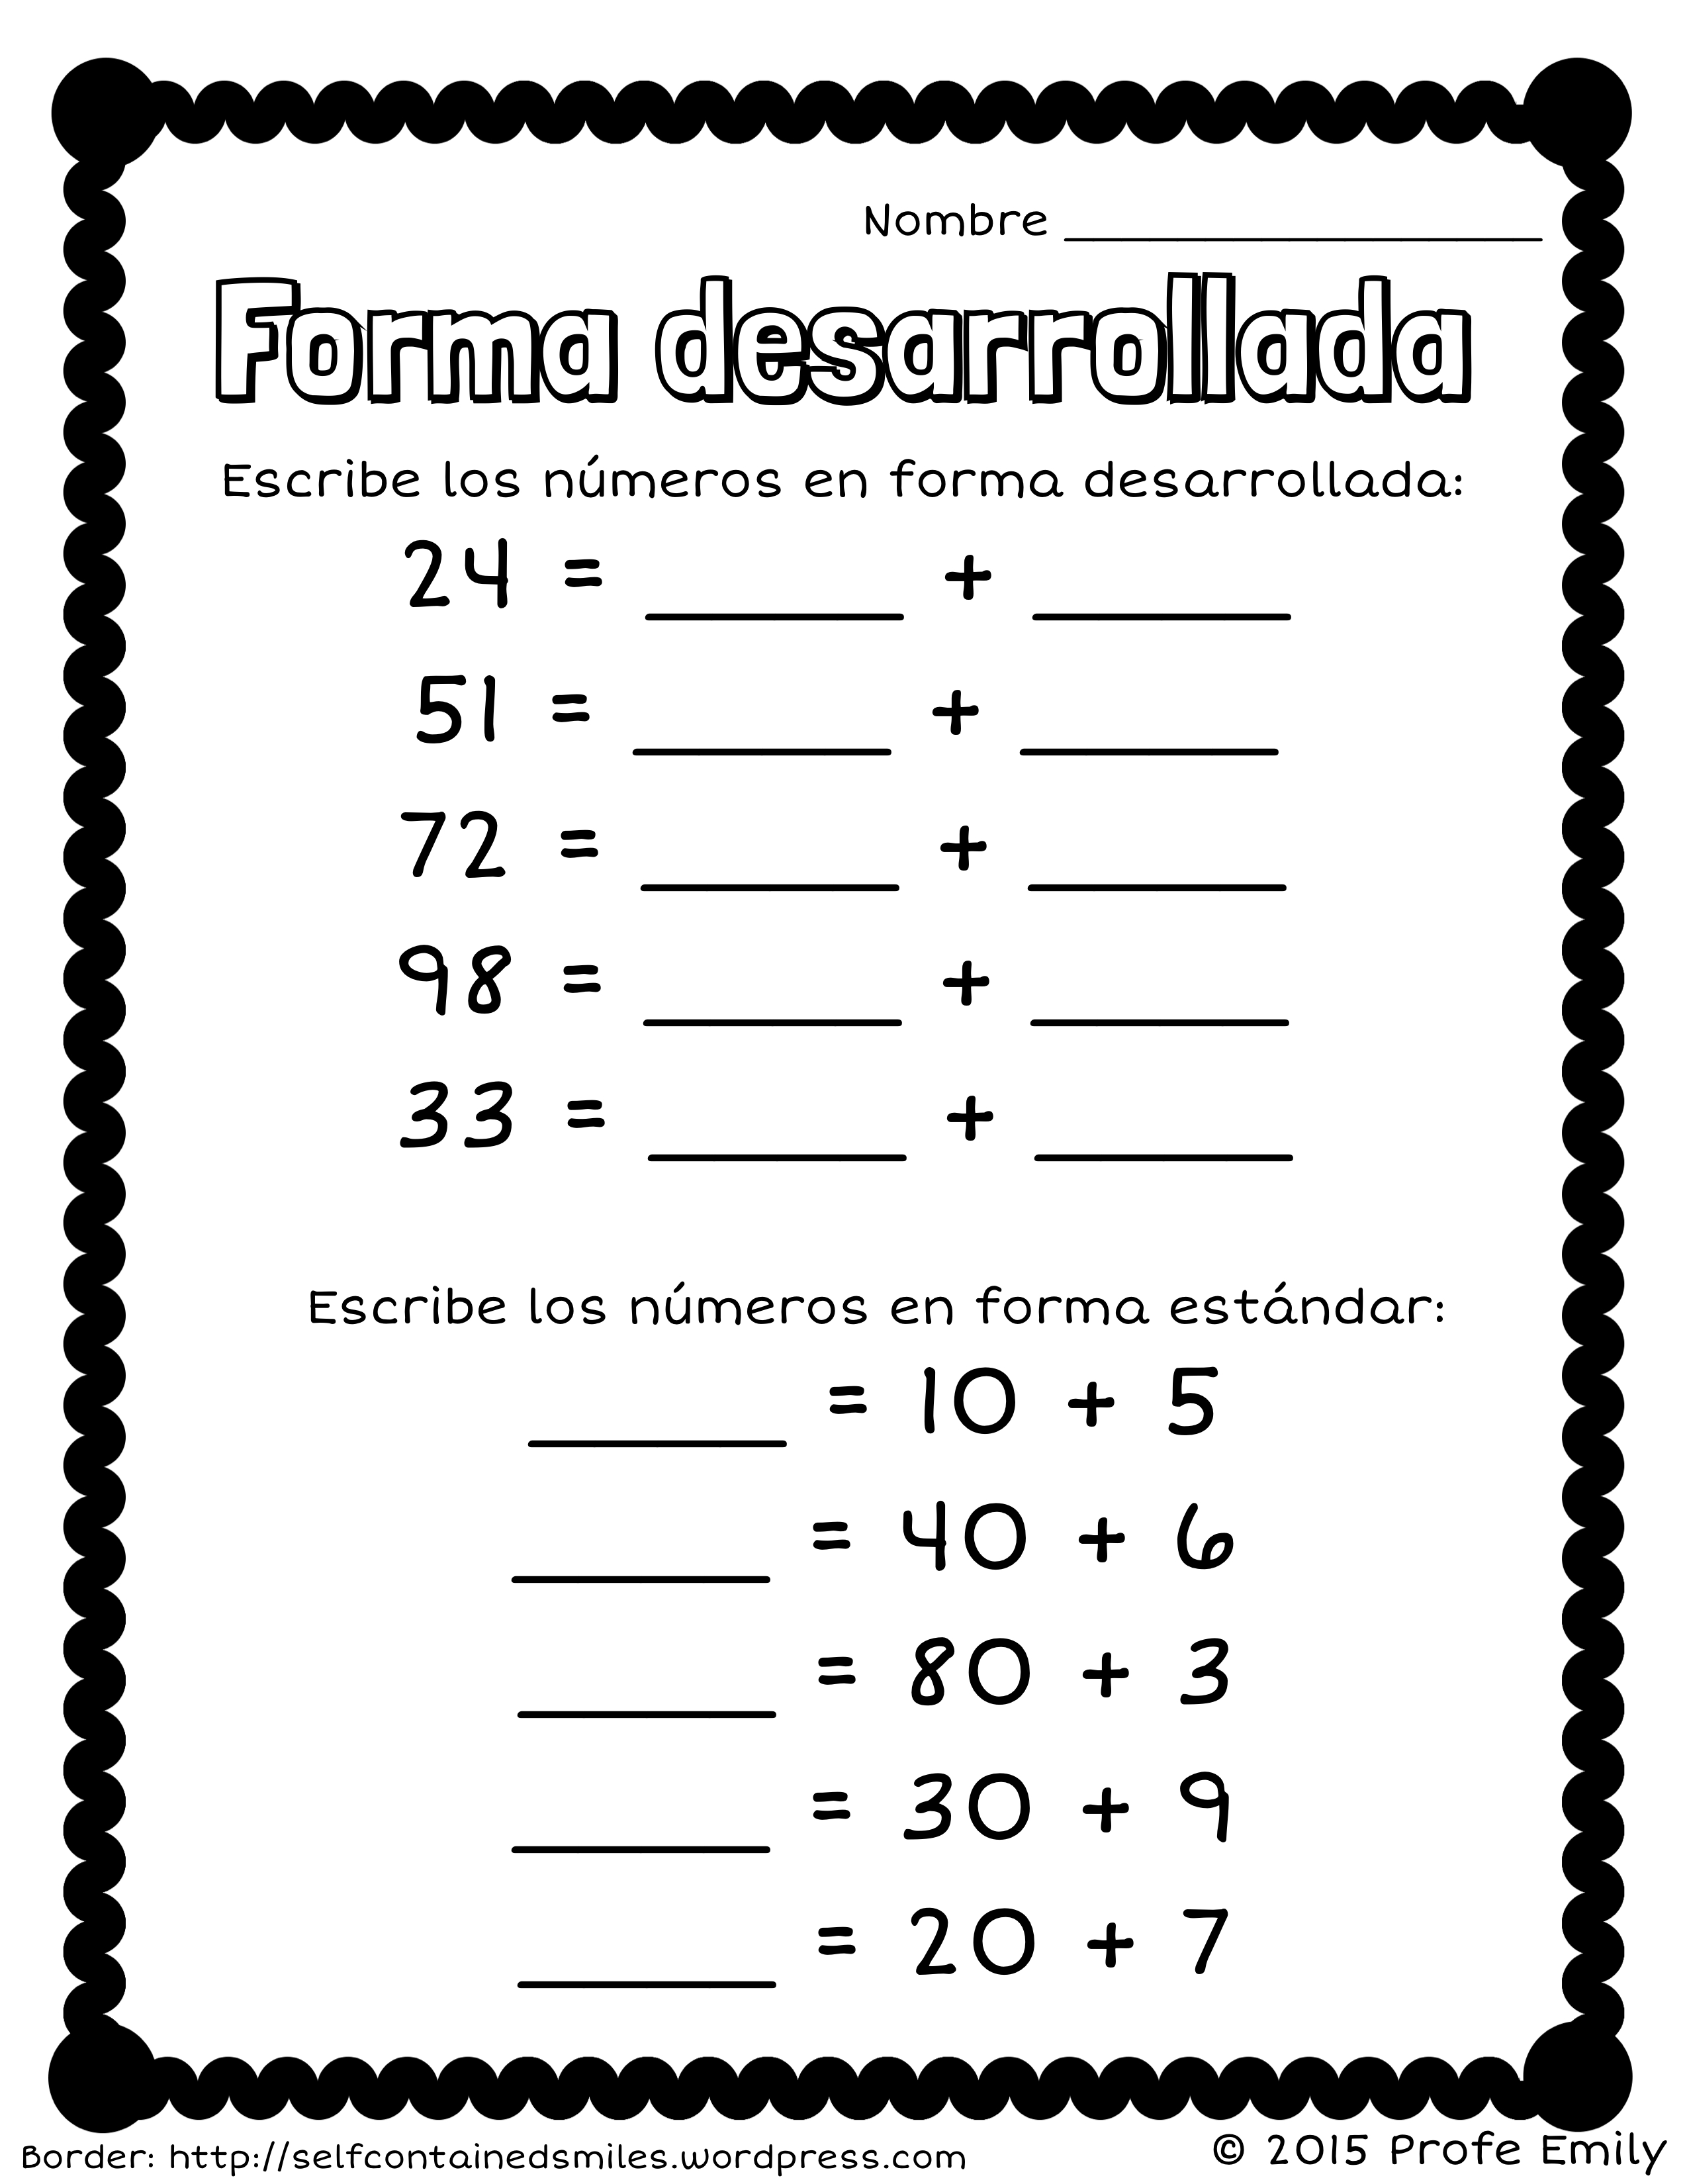 Freebie! Forma Desarrollada. Quick Place Value Worksheet To Review - Free Printable Place Value Chart In Spanish